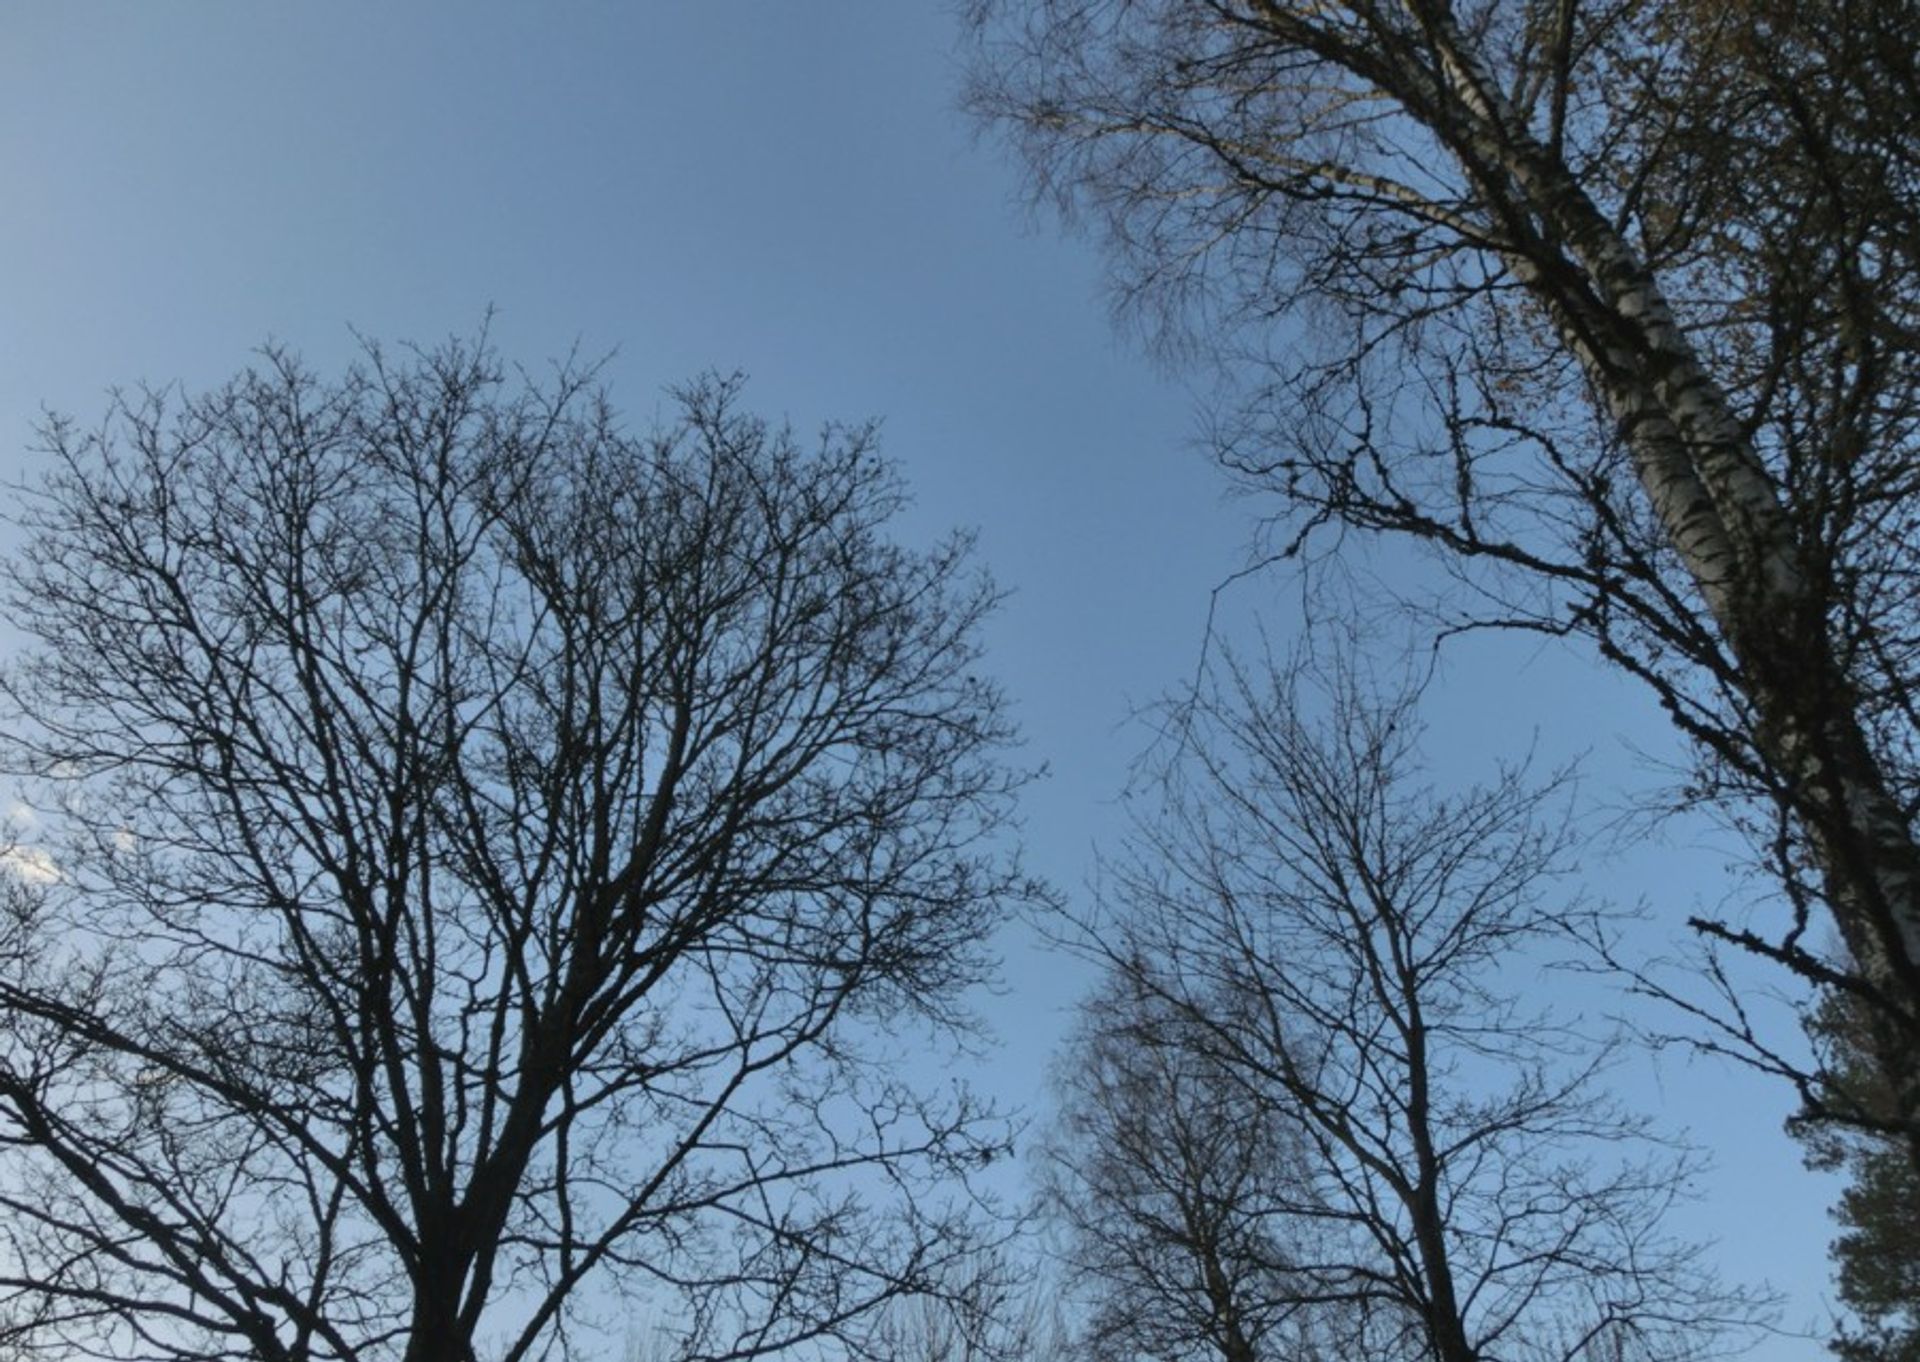 Another picture taken from below where the blue sky is visible and you can see many dark trees with no leafs.